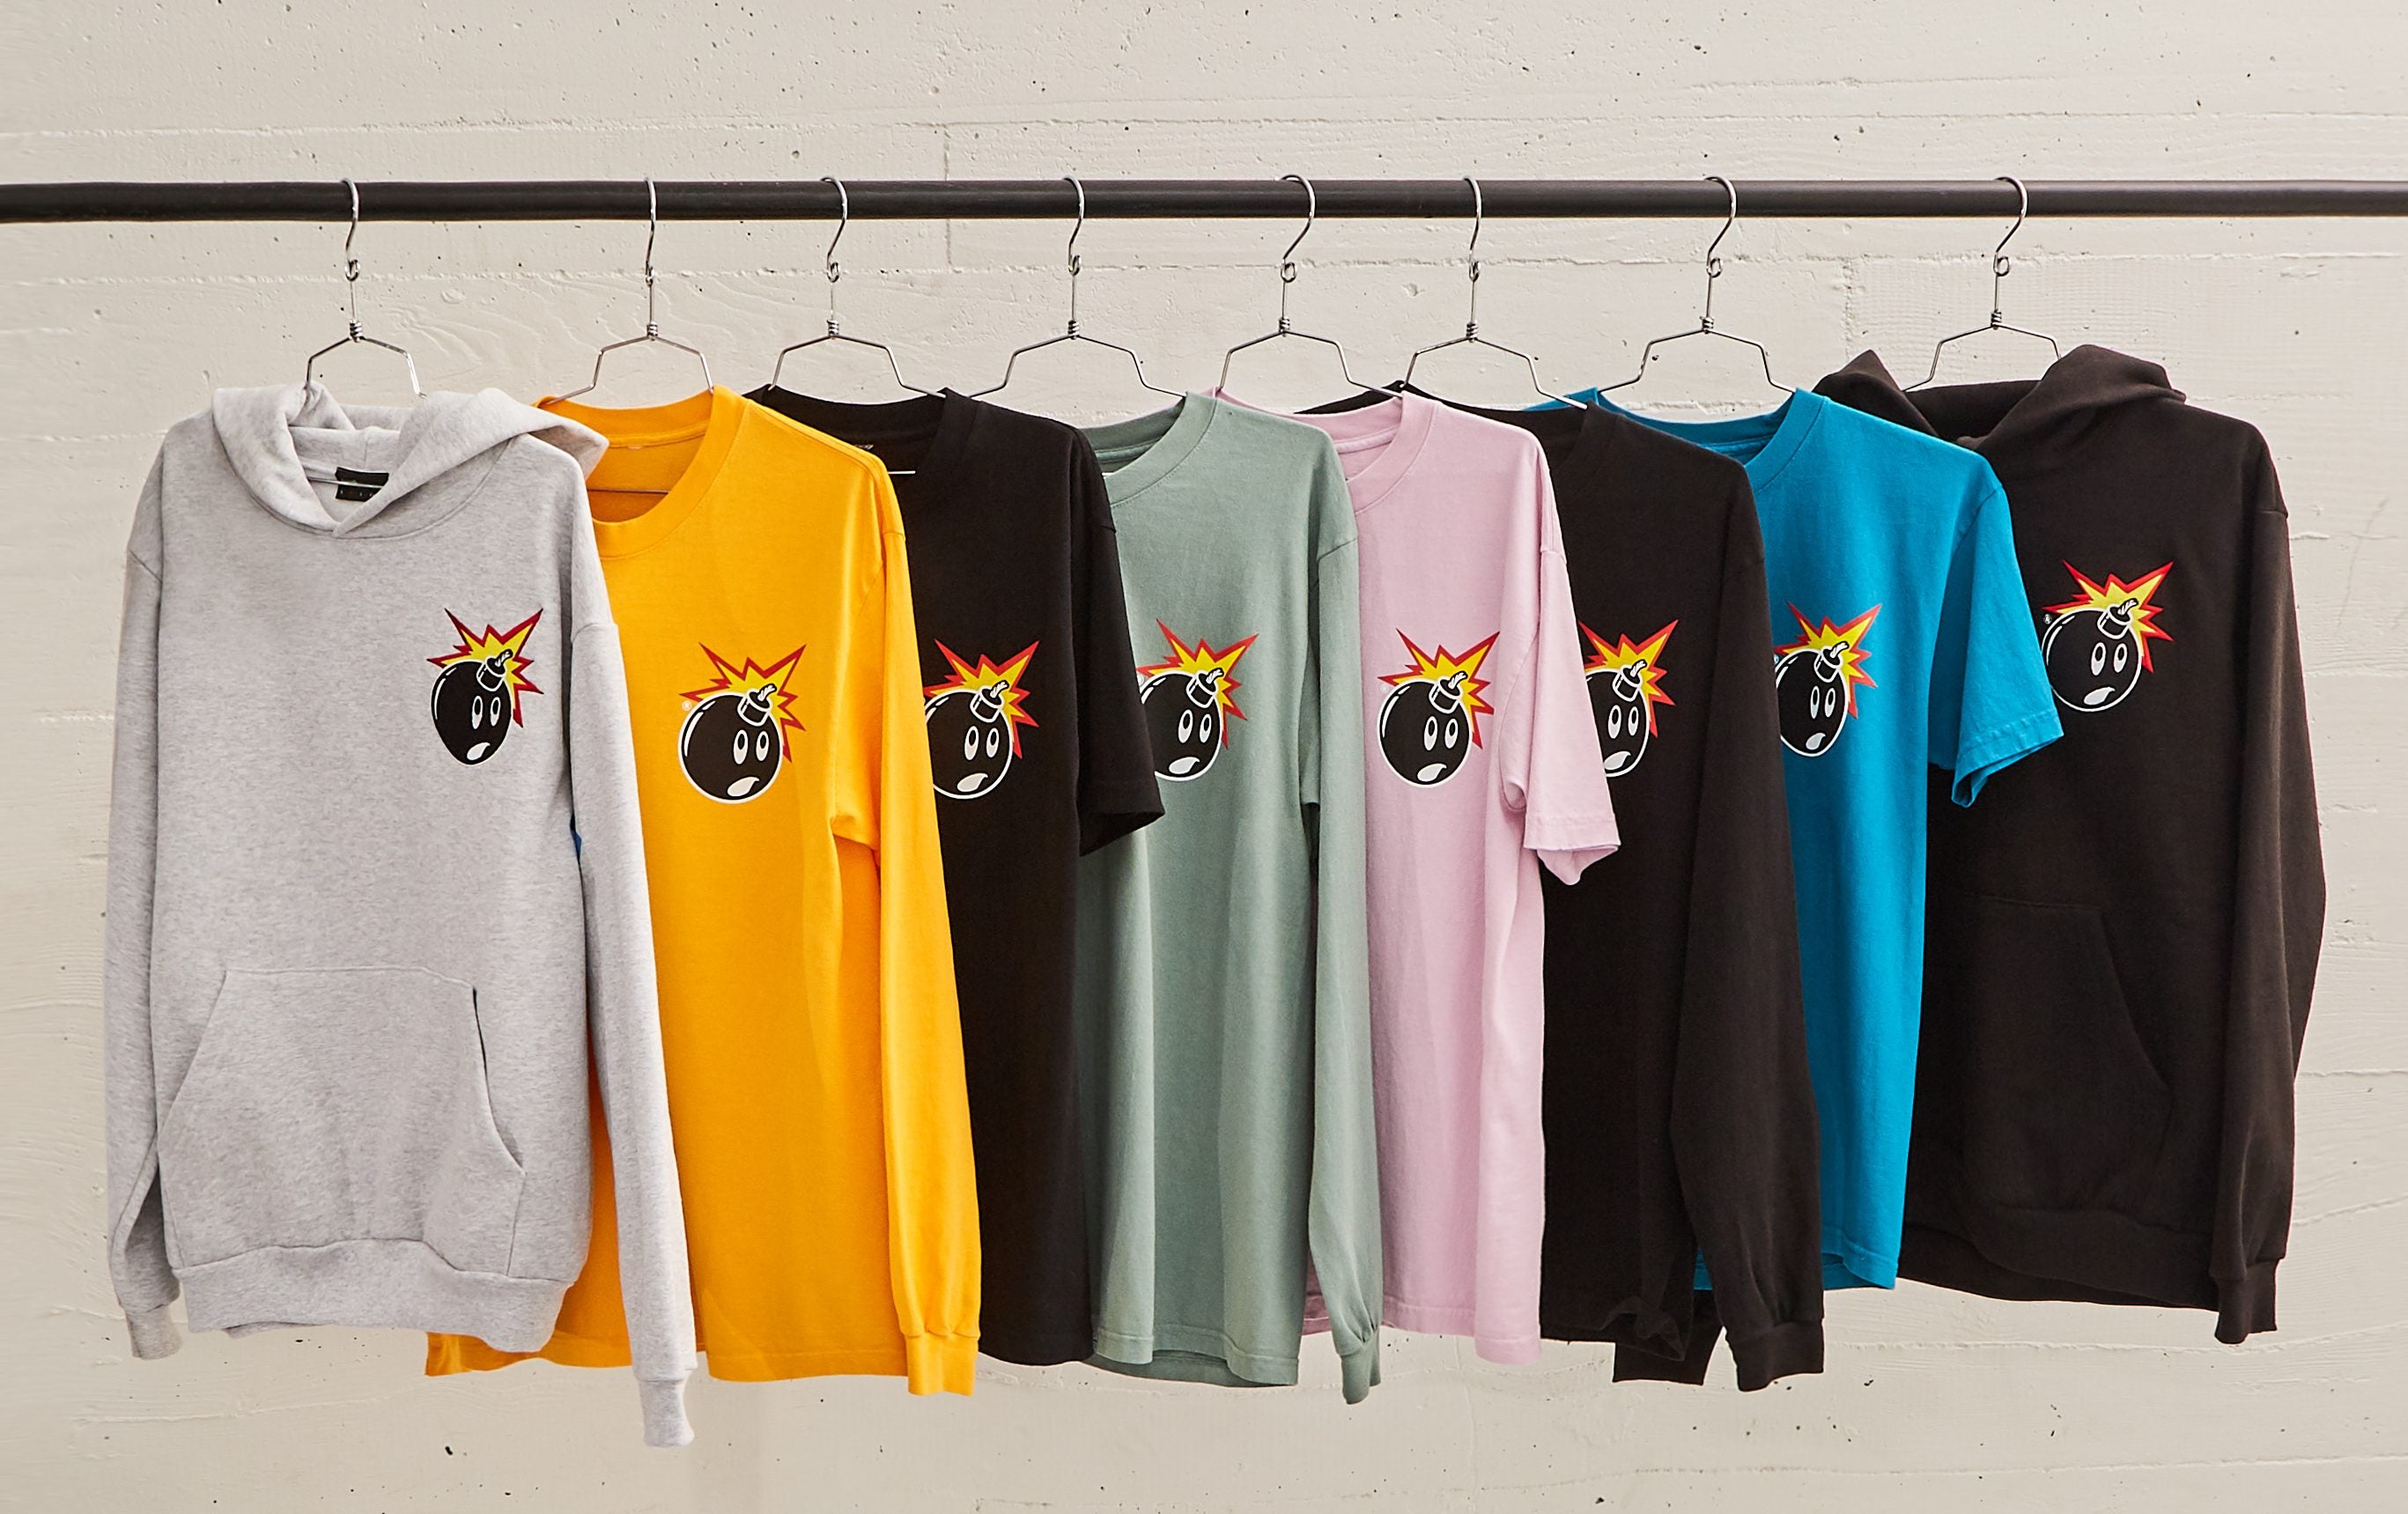 The Hundreds Presents the Adam Bomb Collection - The Hundreds